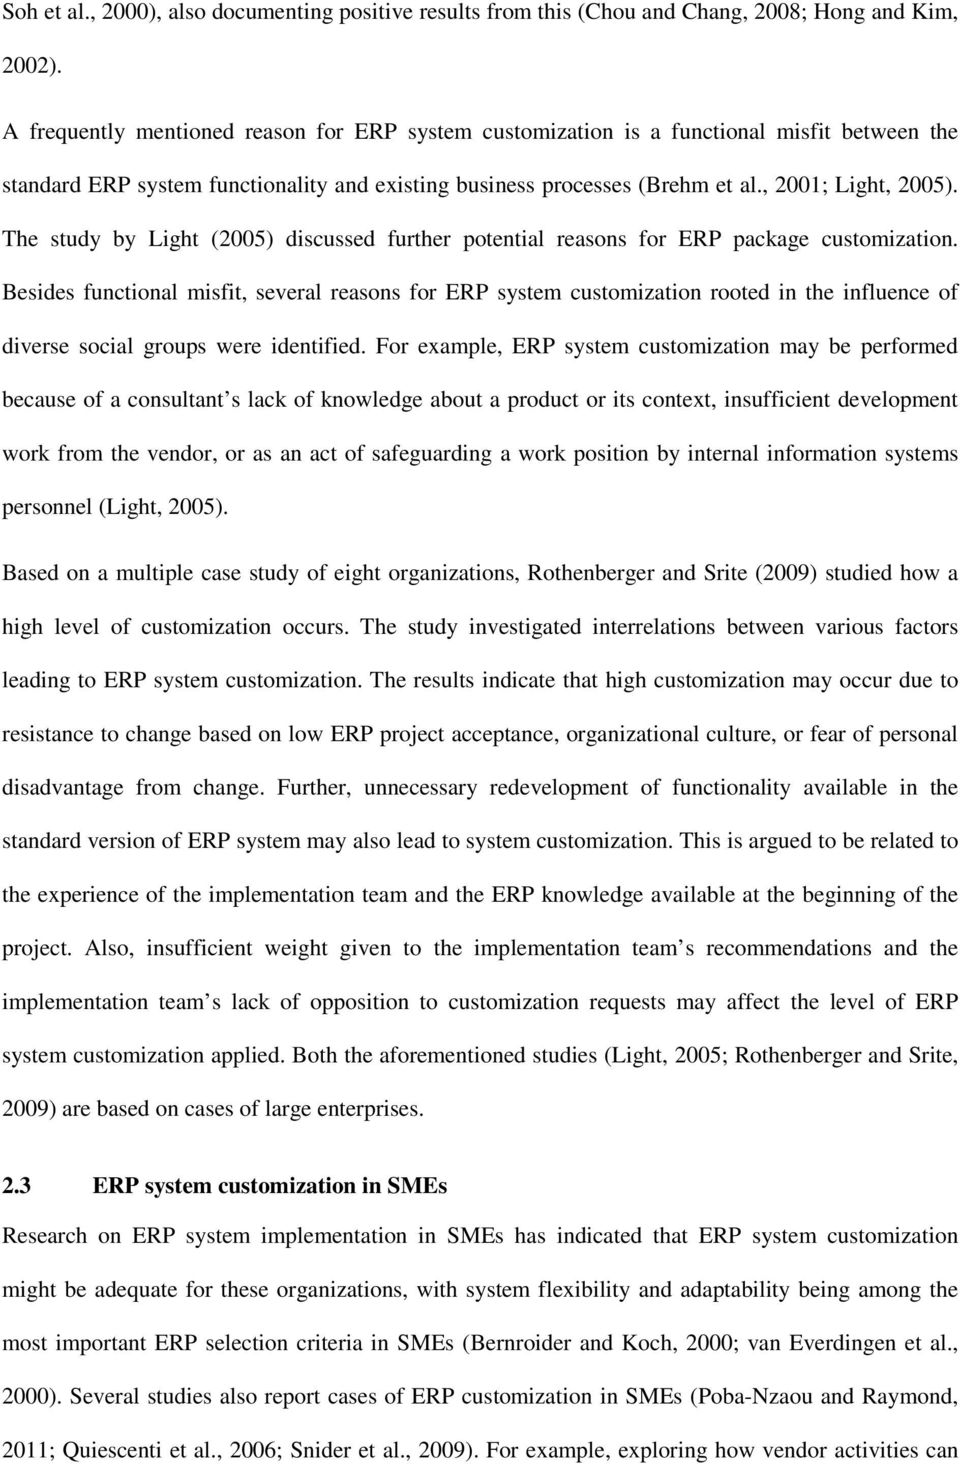 The study by Light (2005) discussed further potential reasons for ERP package customization.